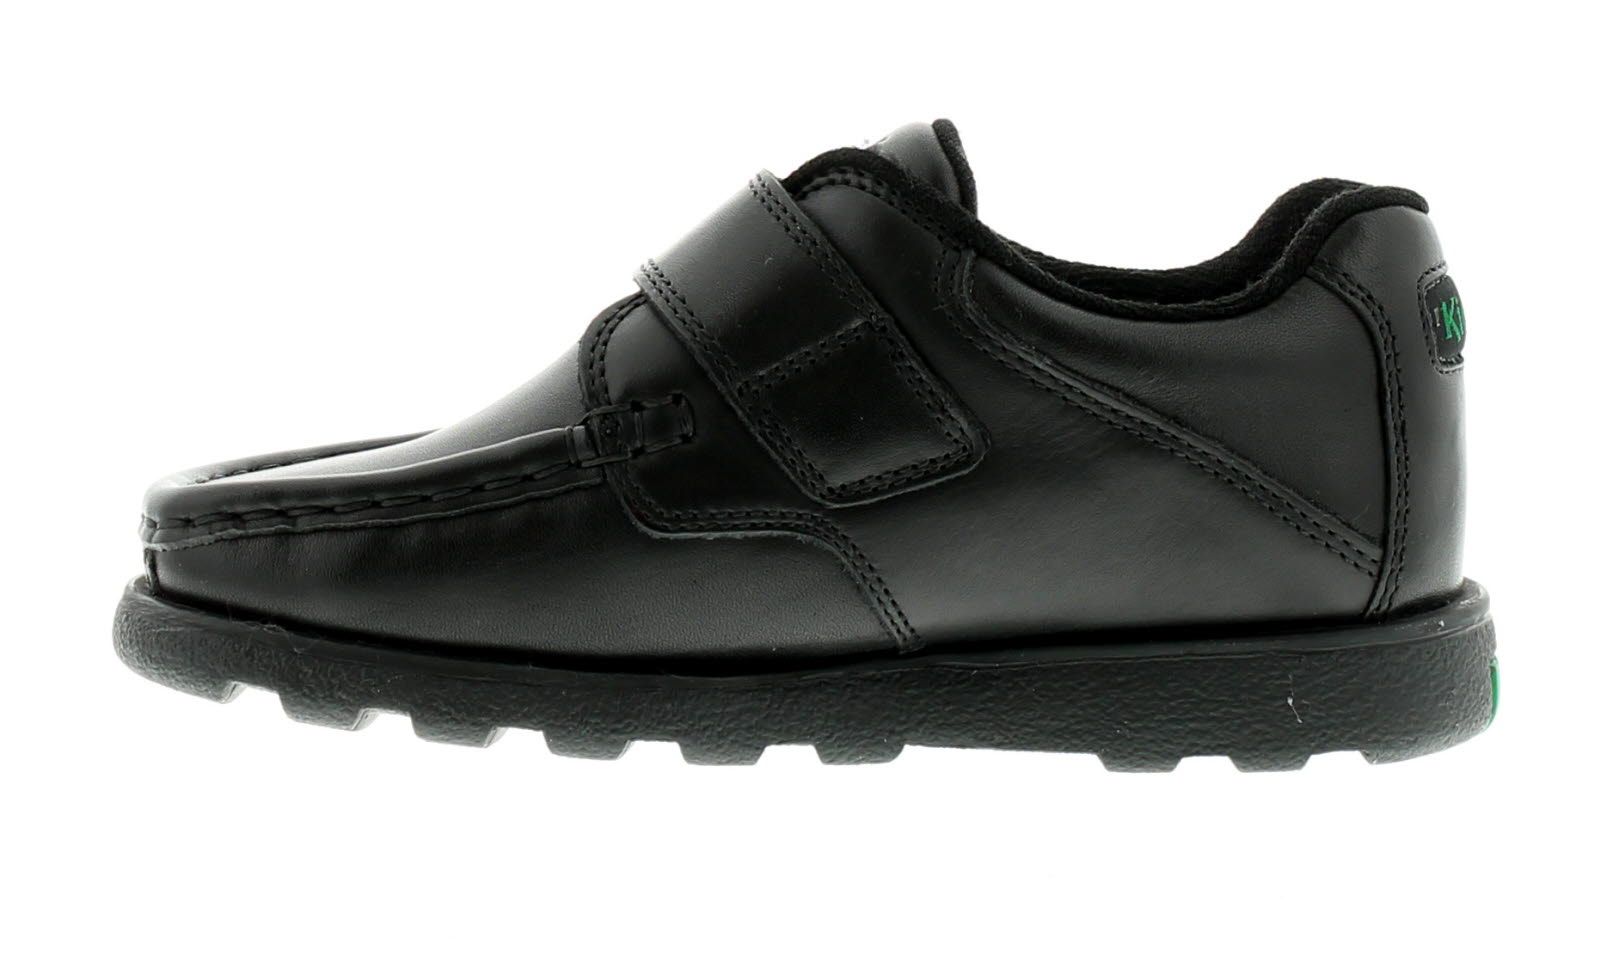 Kickers Fragma Strap3 Infant Boys Shoes In BlackBoys/Childrens Moccasin Style Touch Strap Fastening School Shoes With A Cushioned Foam Footbed And A Sporty Style Sneaker Silhouette. Suitable For Younger Boys Size Range 7X12.Leather UpperFabric LiningSynthetic SoleKids Lads Branded Black Fashion Shoes Hook And Loop Casual Shoes Occasionwear